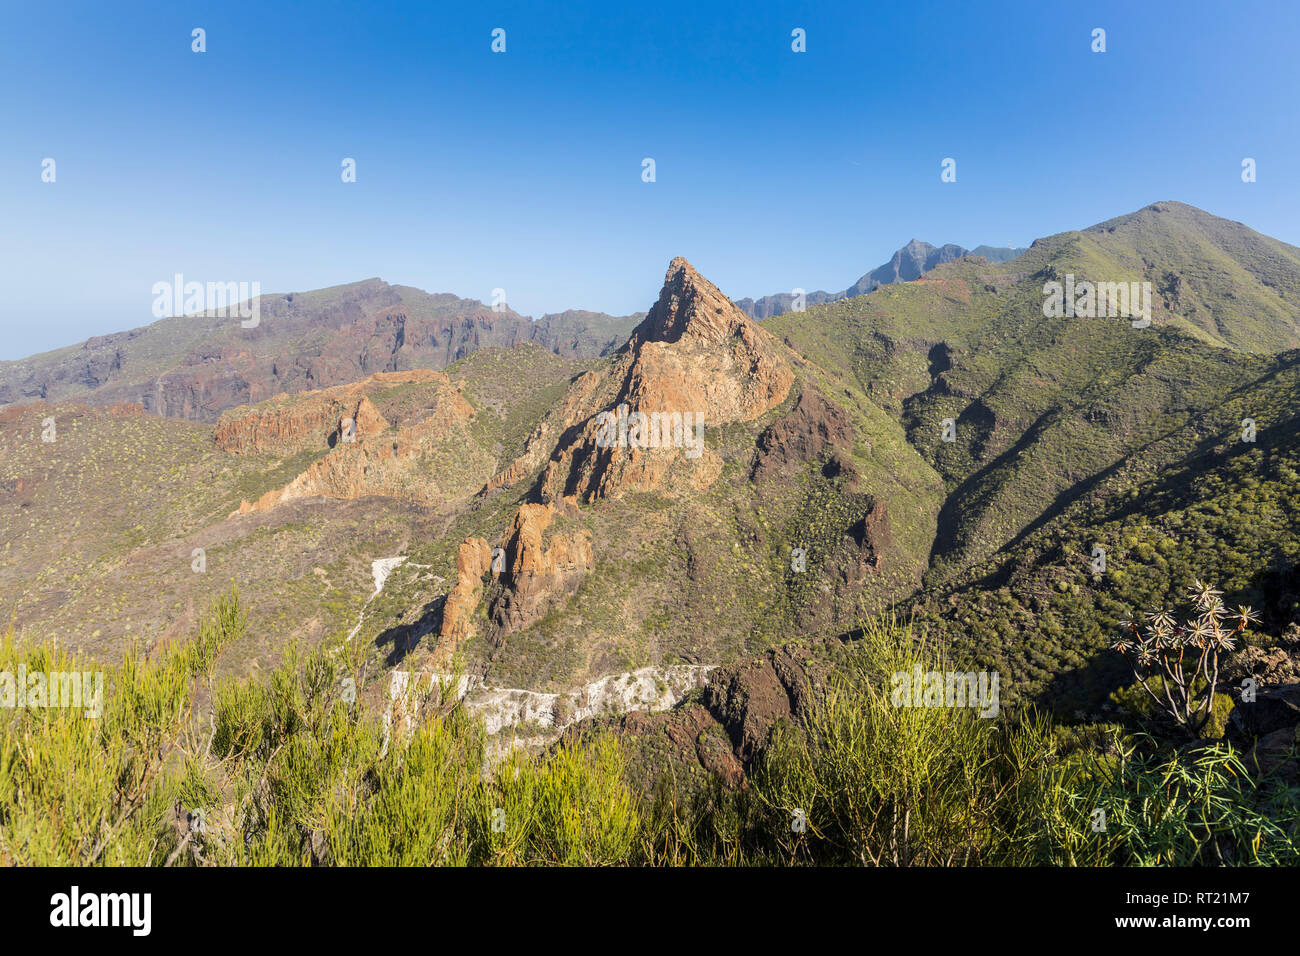 View to the rock formation, Risco Blanco, in the Los Gigantes cliffs above Tamaimo, Santiago del Teide, Tenerife, Canary Islands, Spain Stock Photo